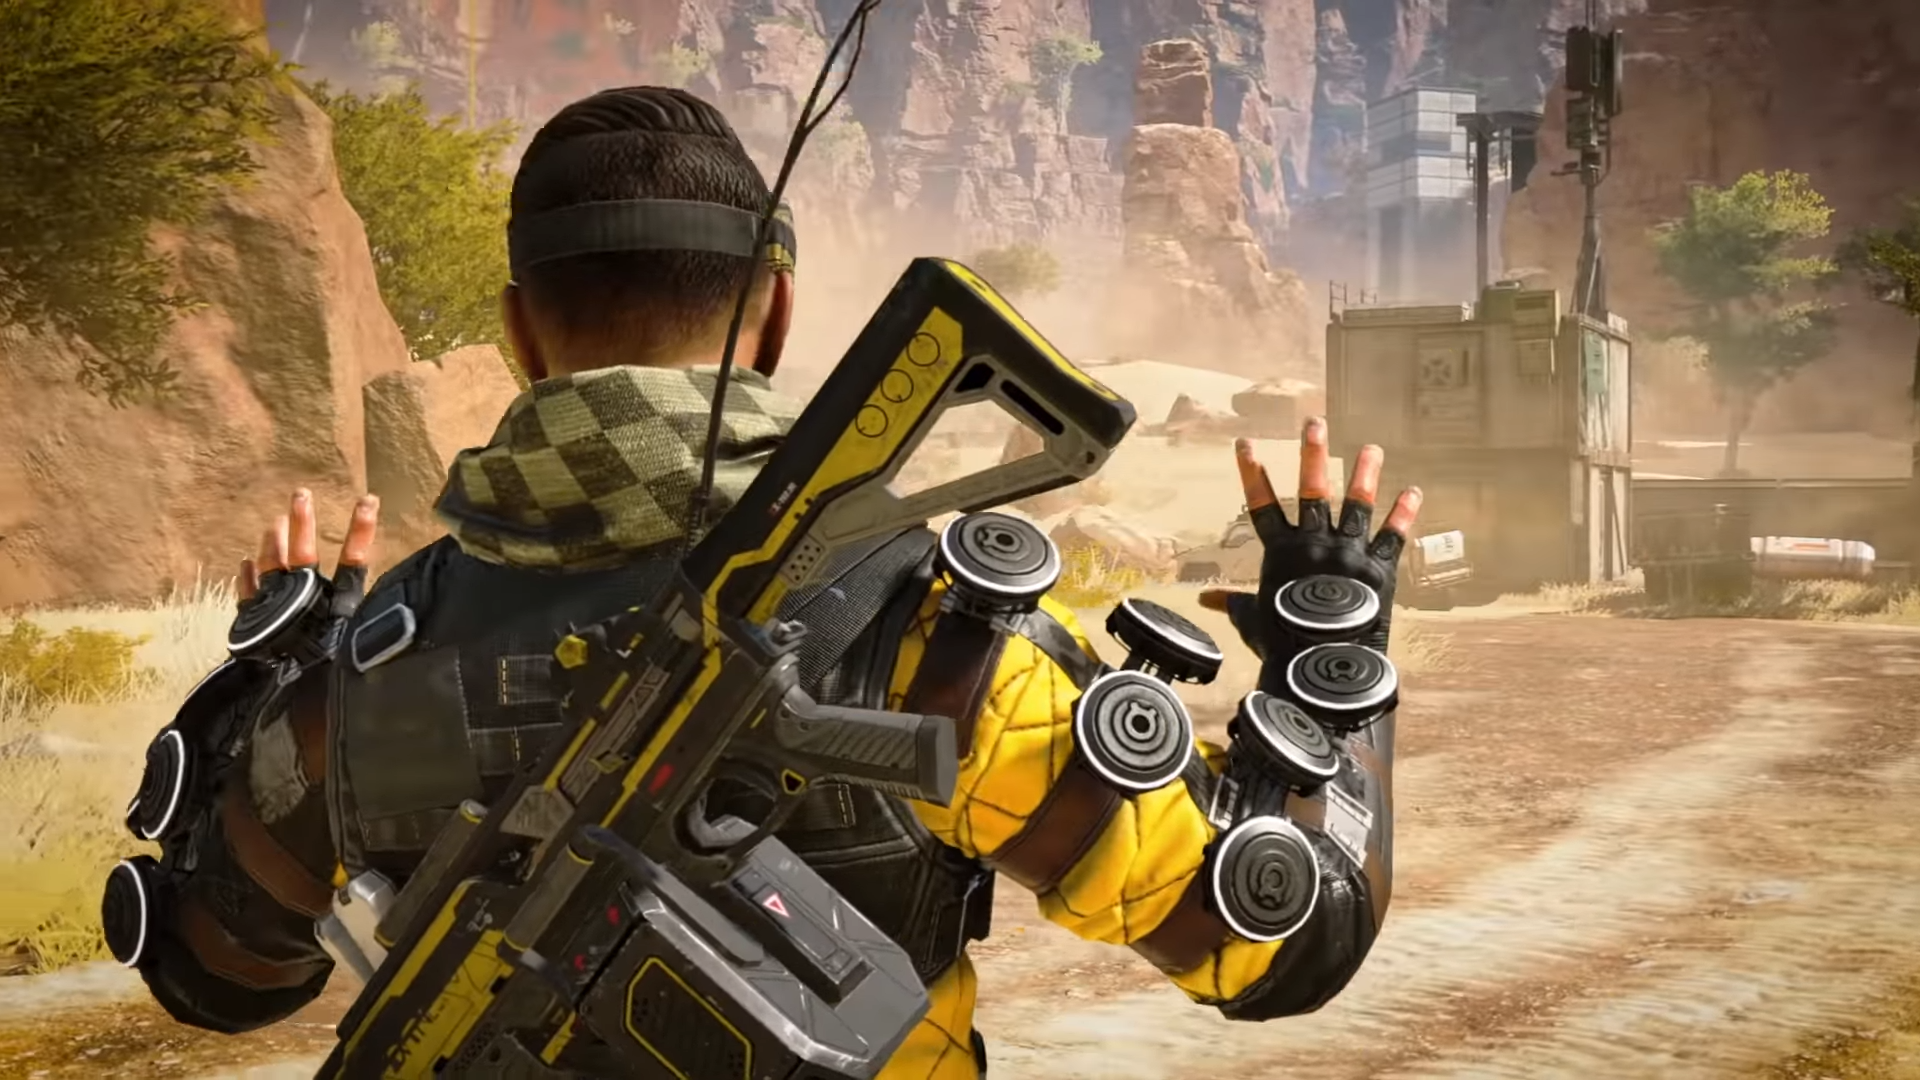 Apex Legends' Twitter page teases big YouTube announcement tomorrow